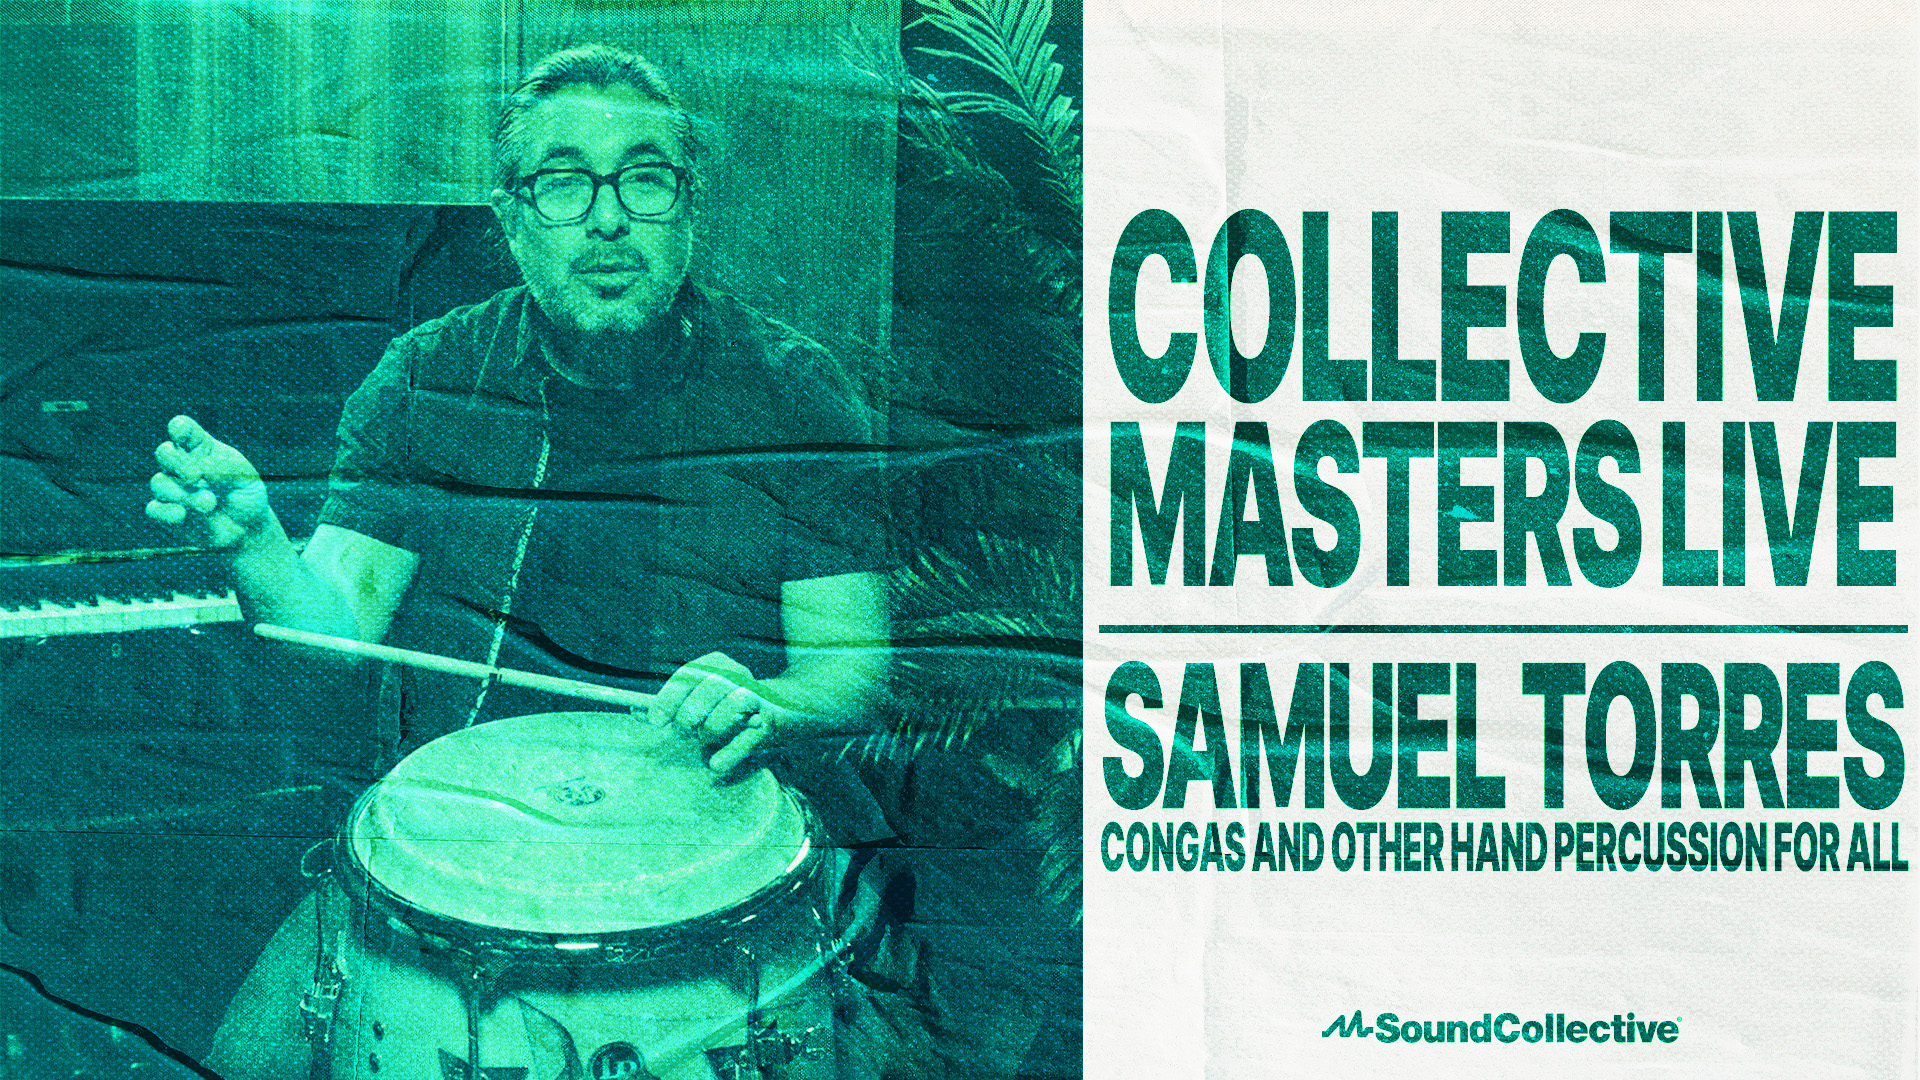 Collective Masters Live: Congas And Other Hand Percussion For All